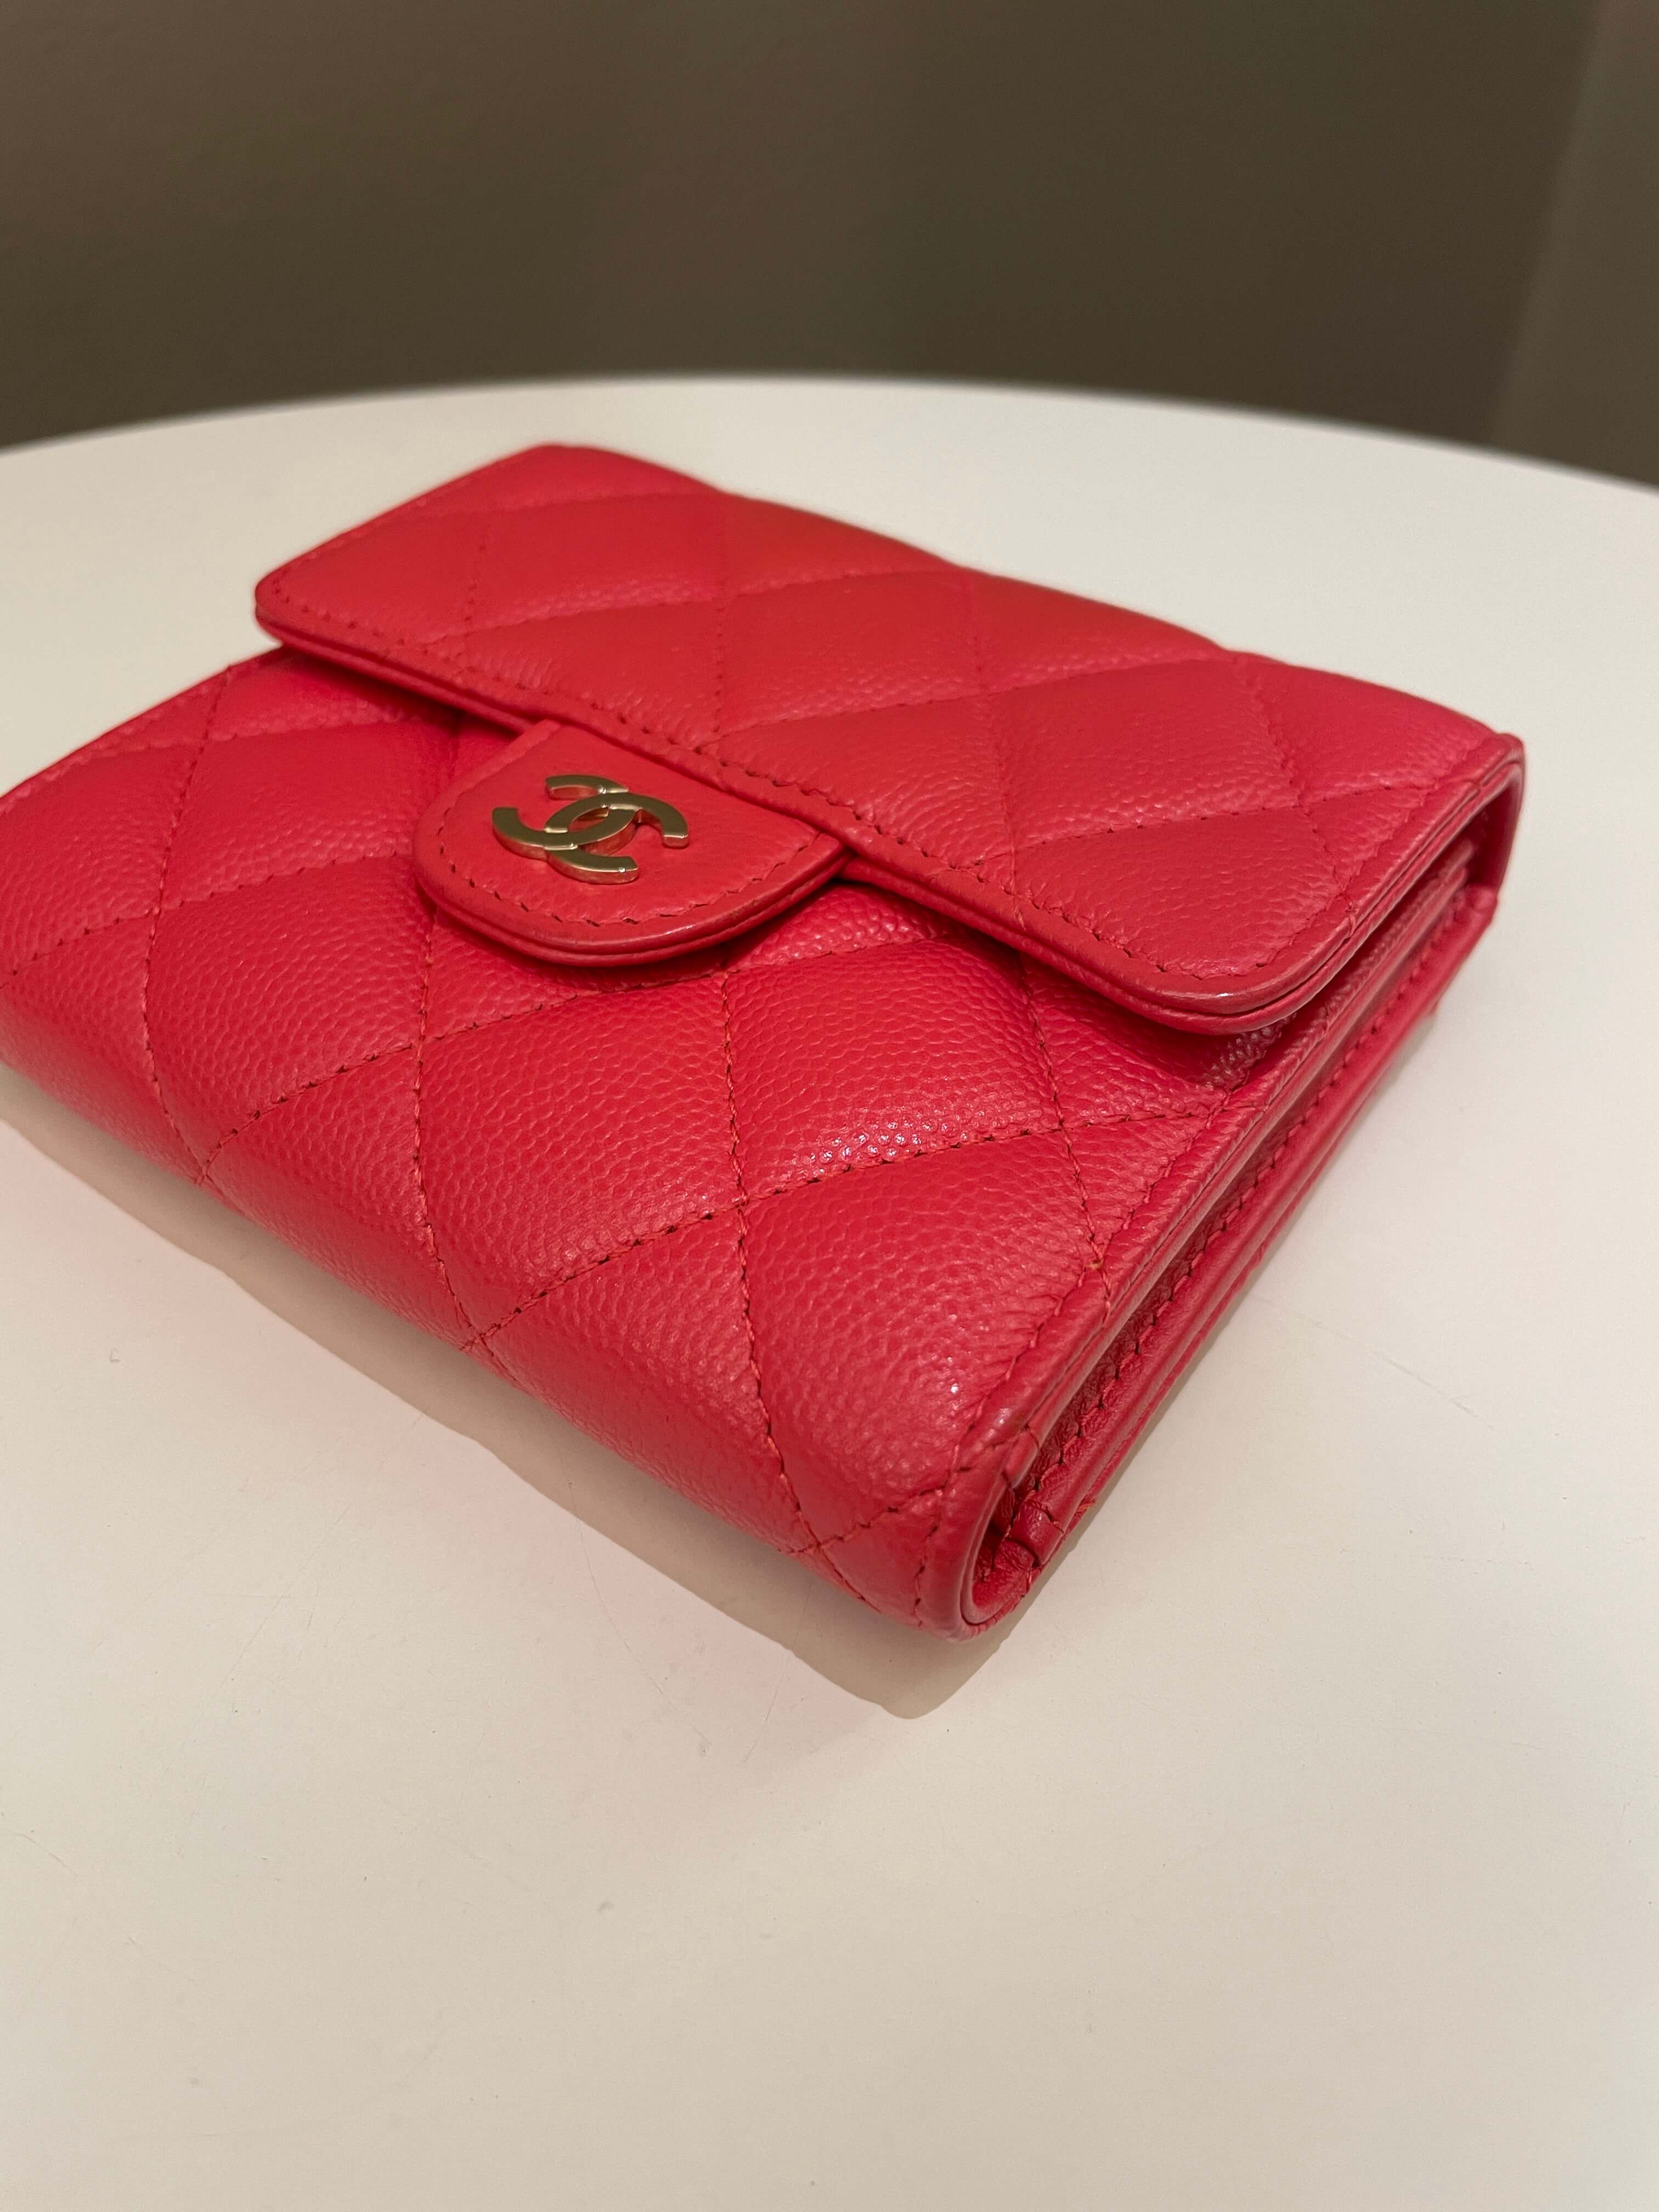 Chanel Classic Quilted Tri Fold Compact Wallet
Coral Red Caviar